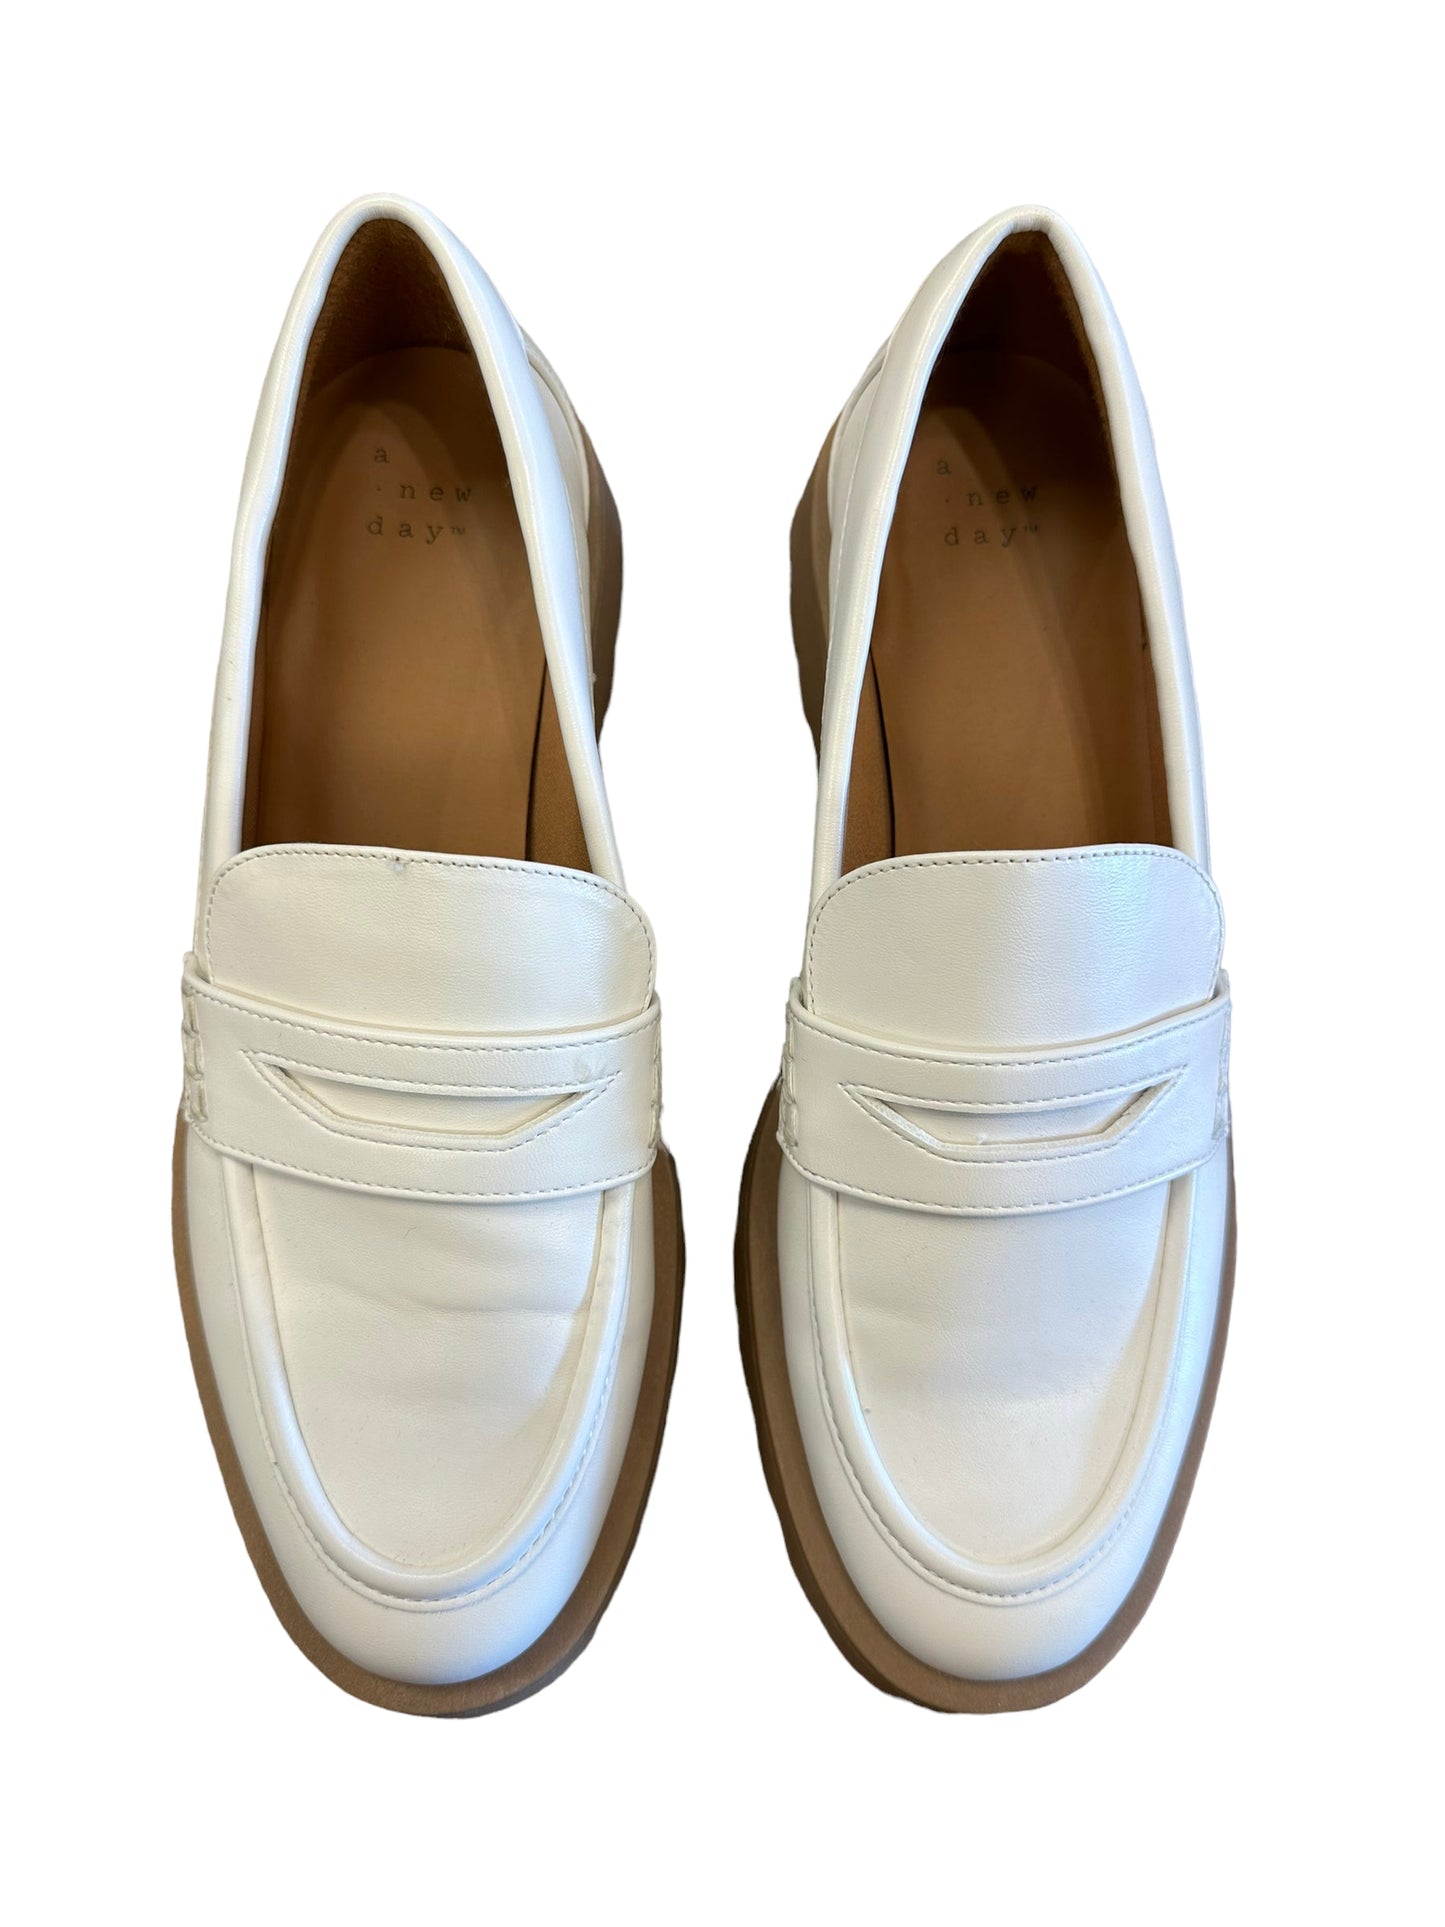 Shoes Flats Loafer Oxford By A New Day  Size: 8